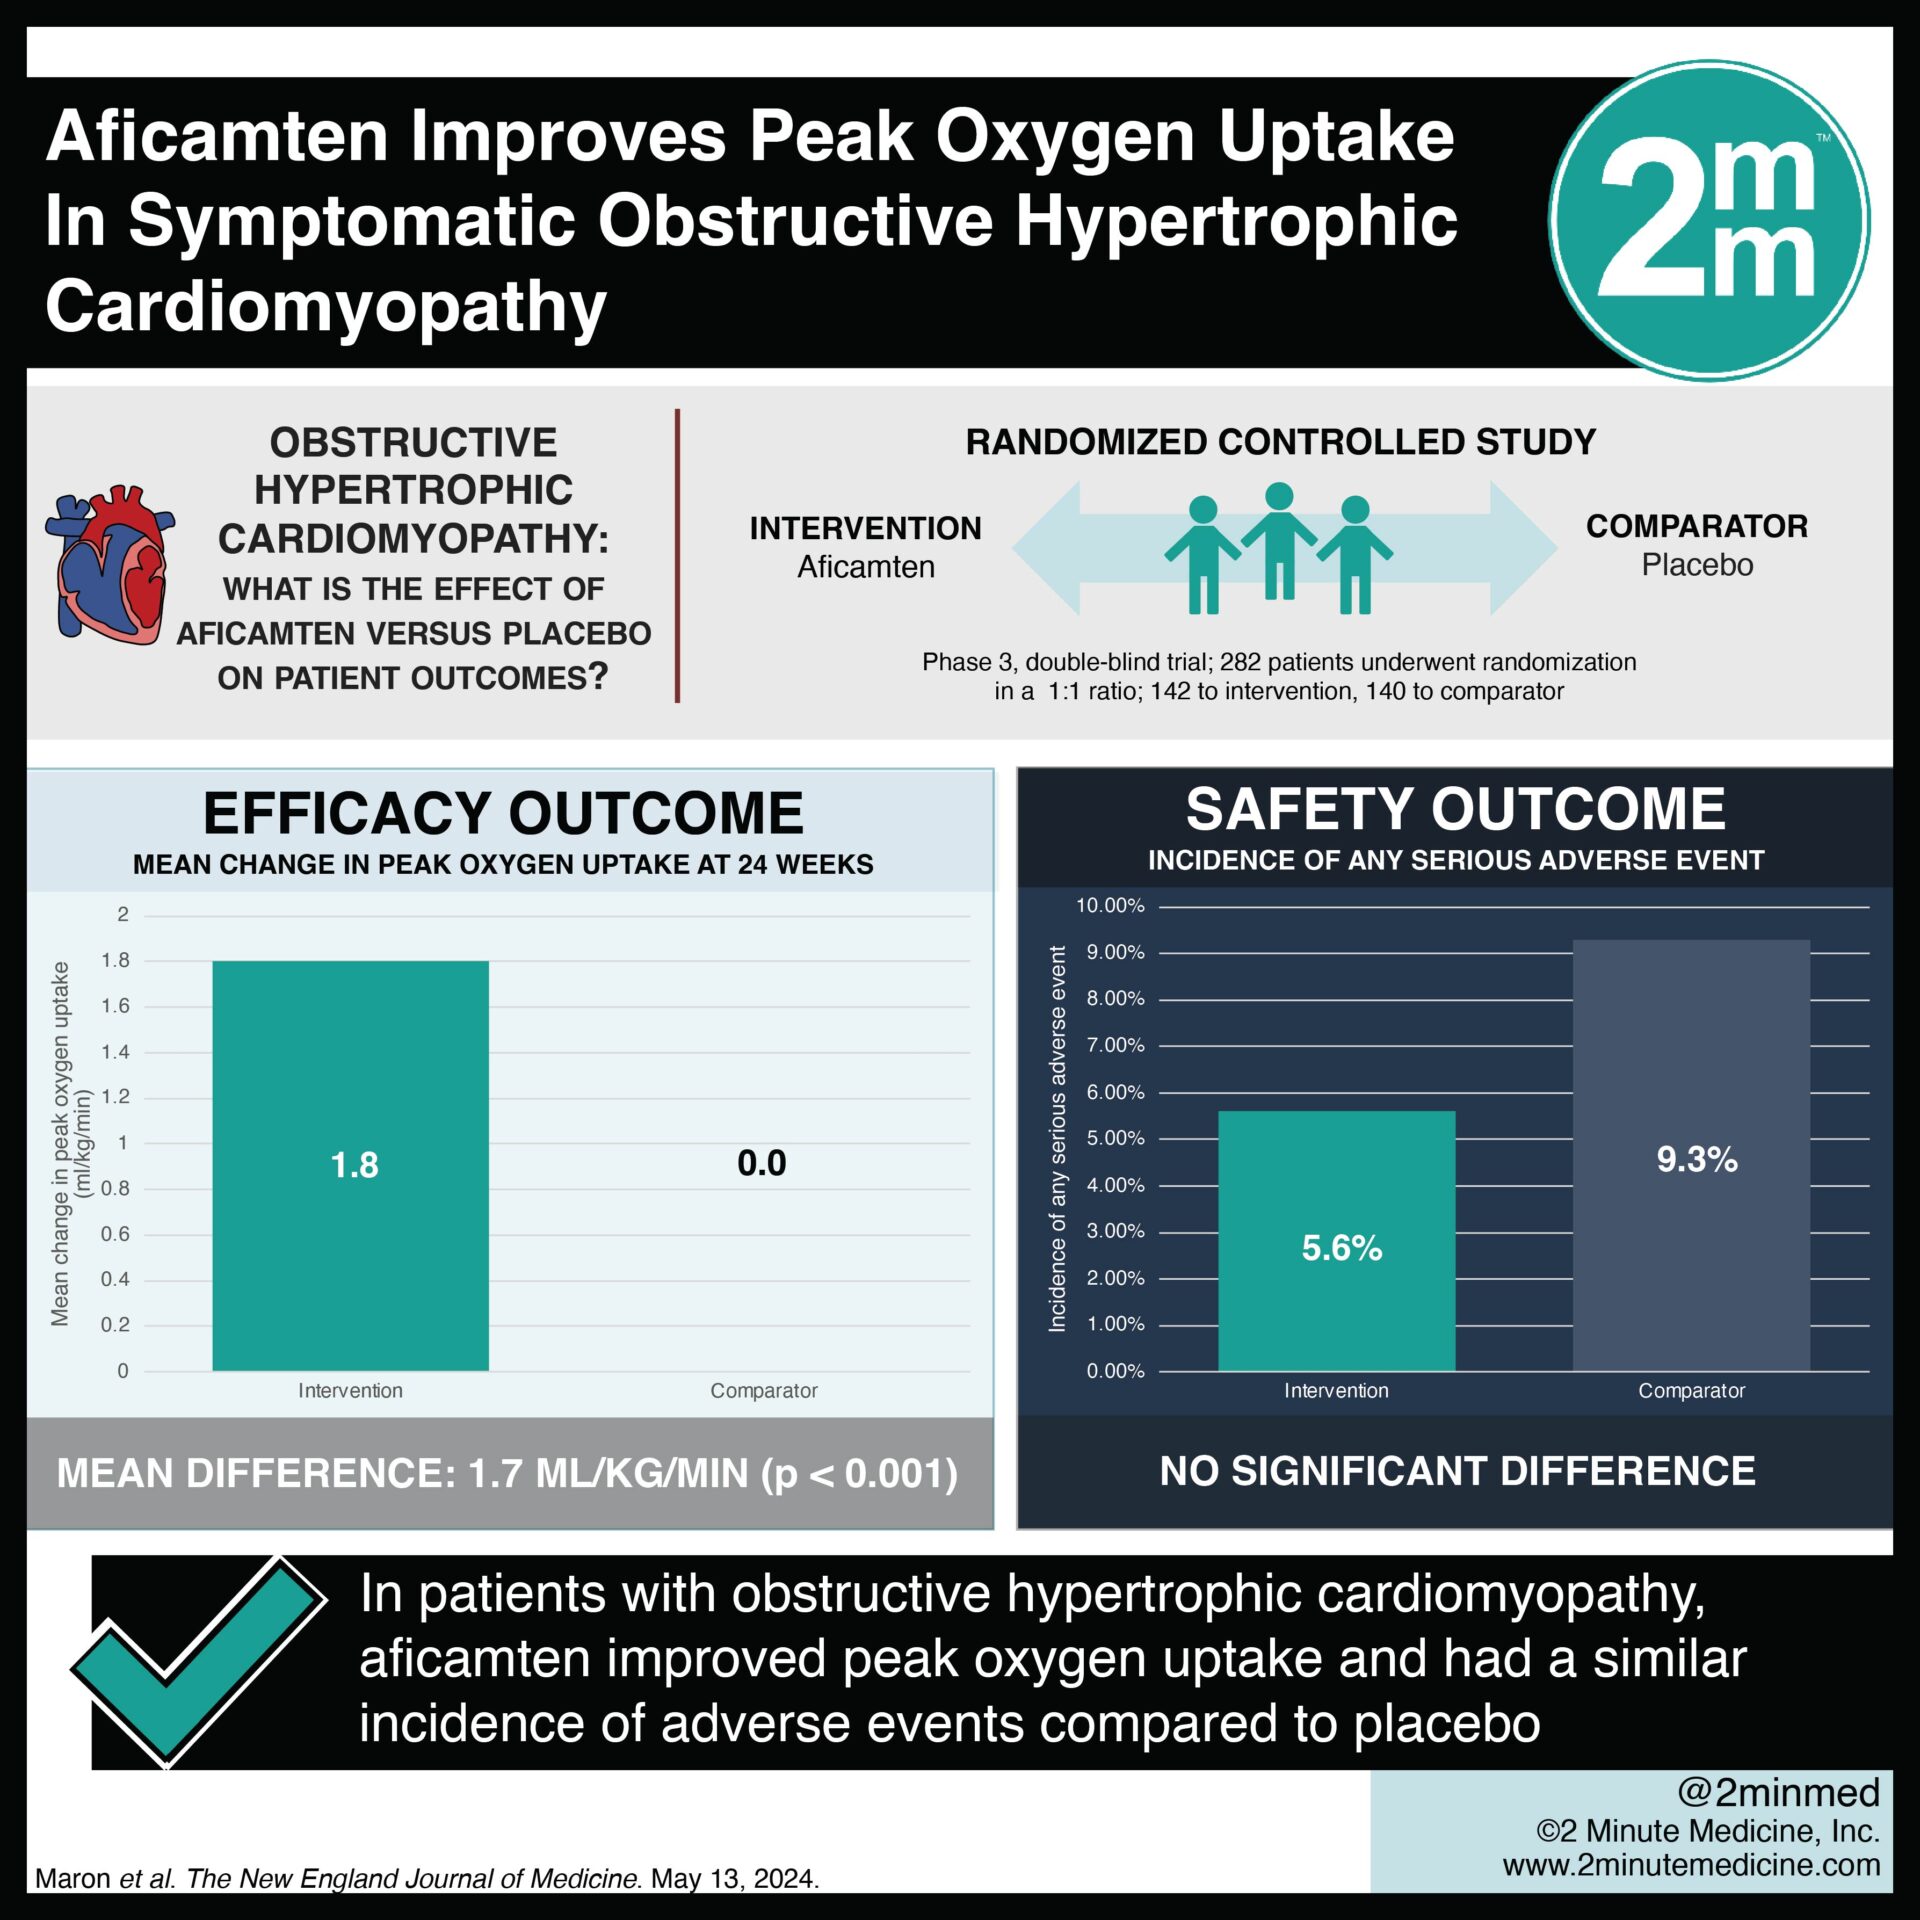 #VisualAbstract: Aficamten for Symptomatic Obstructive Hypertrophic Cardiomyopathy